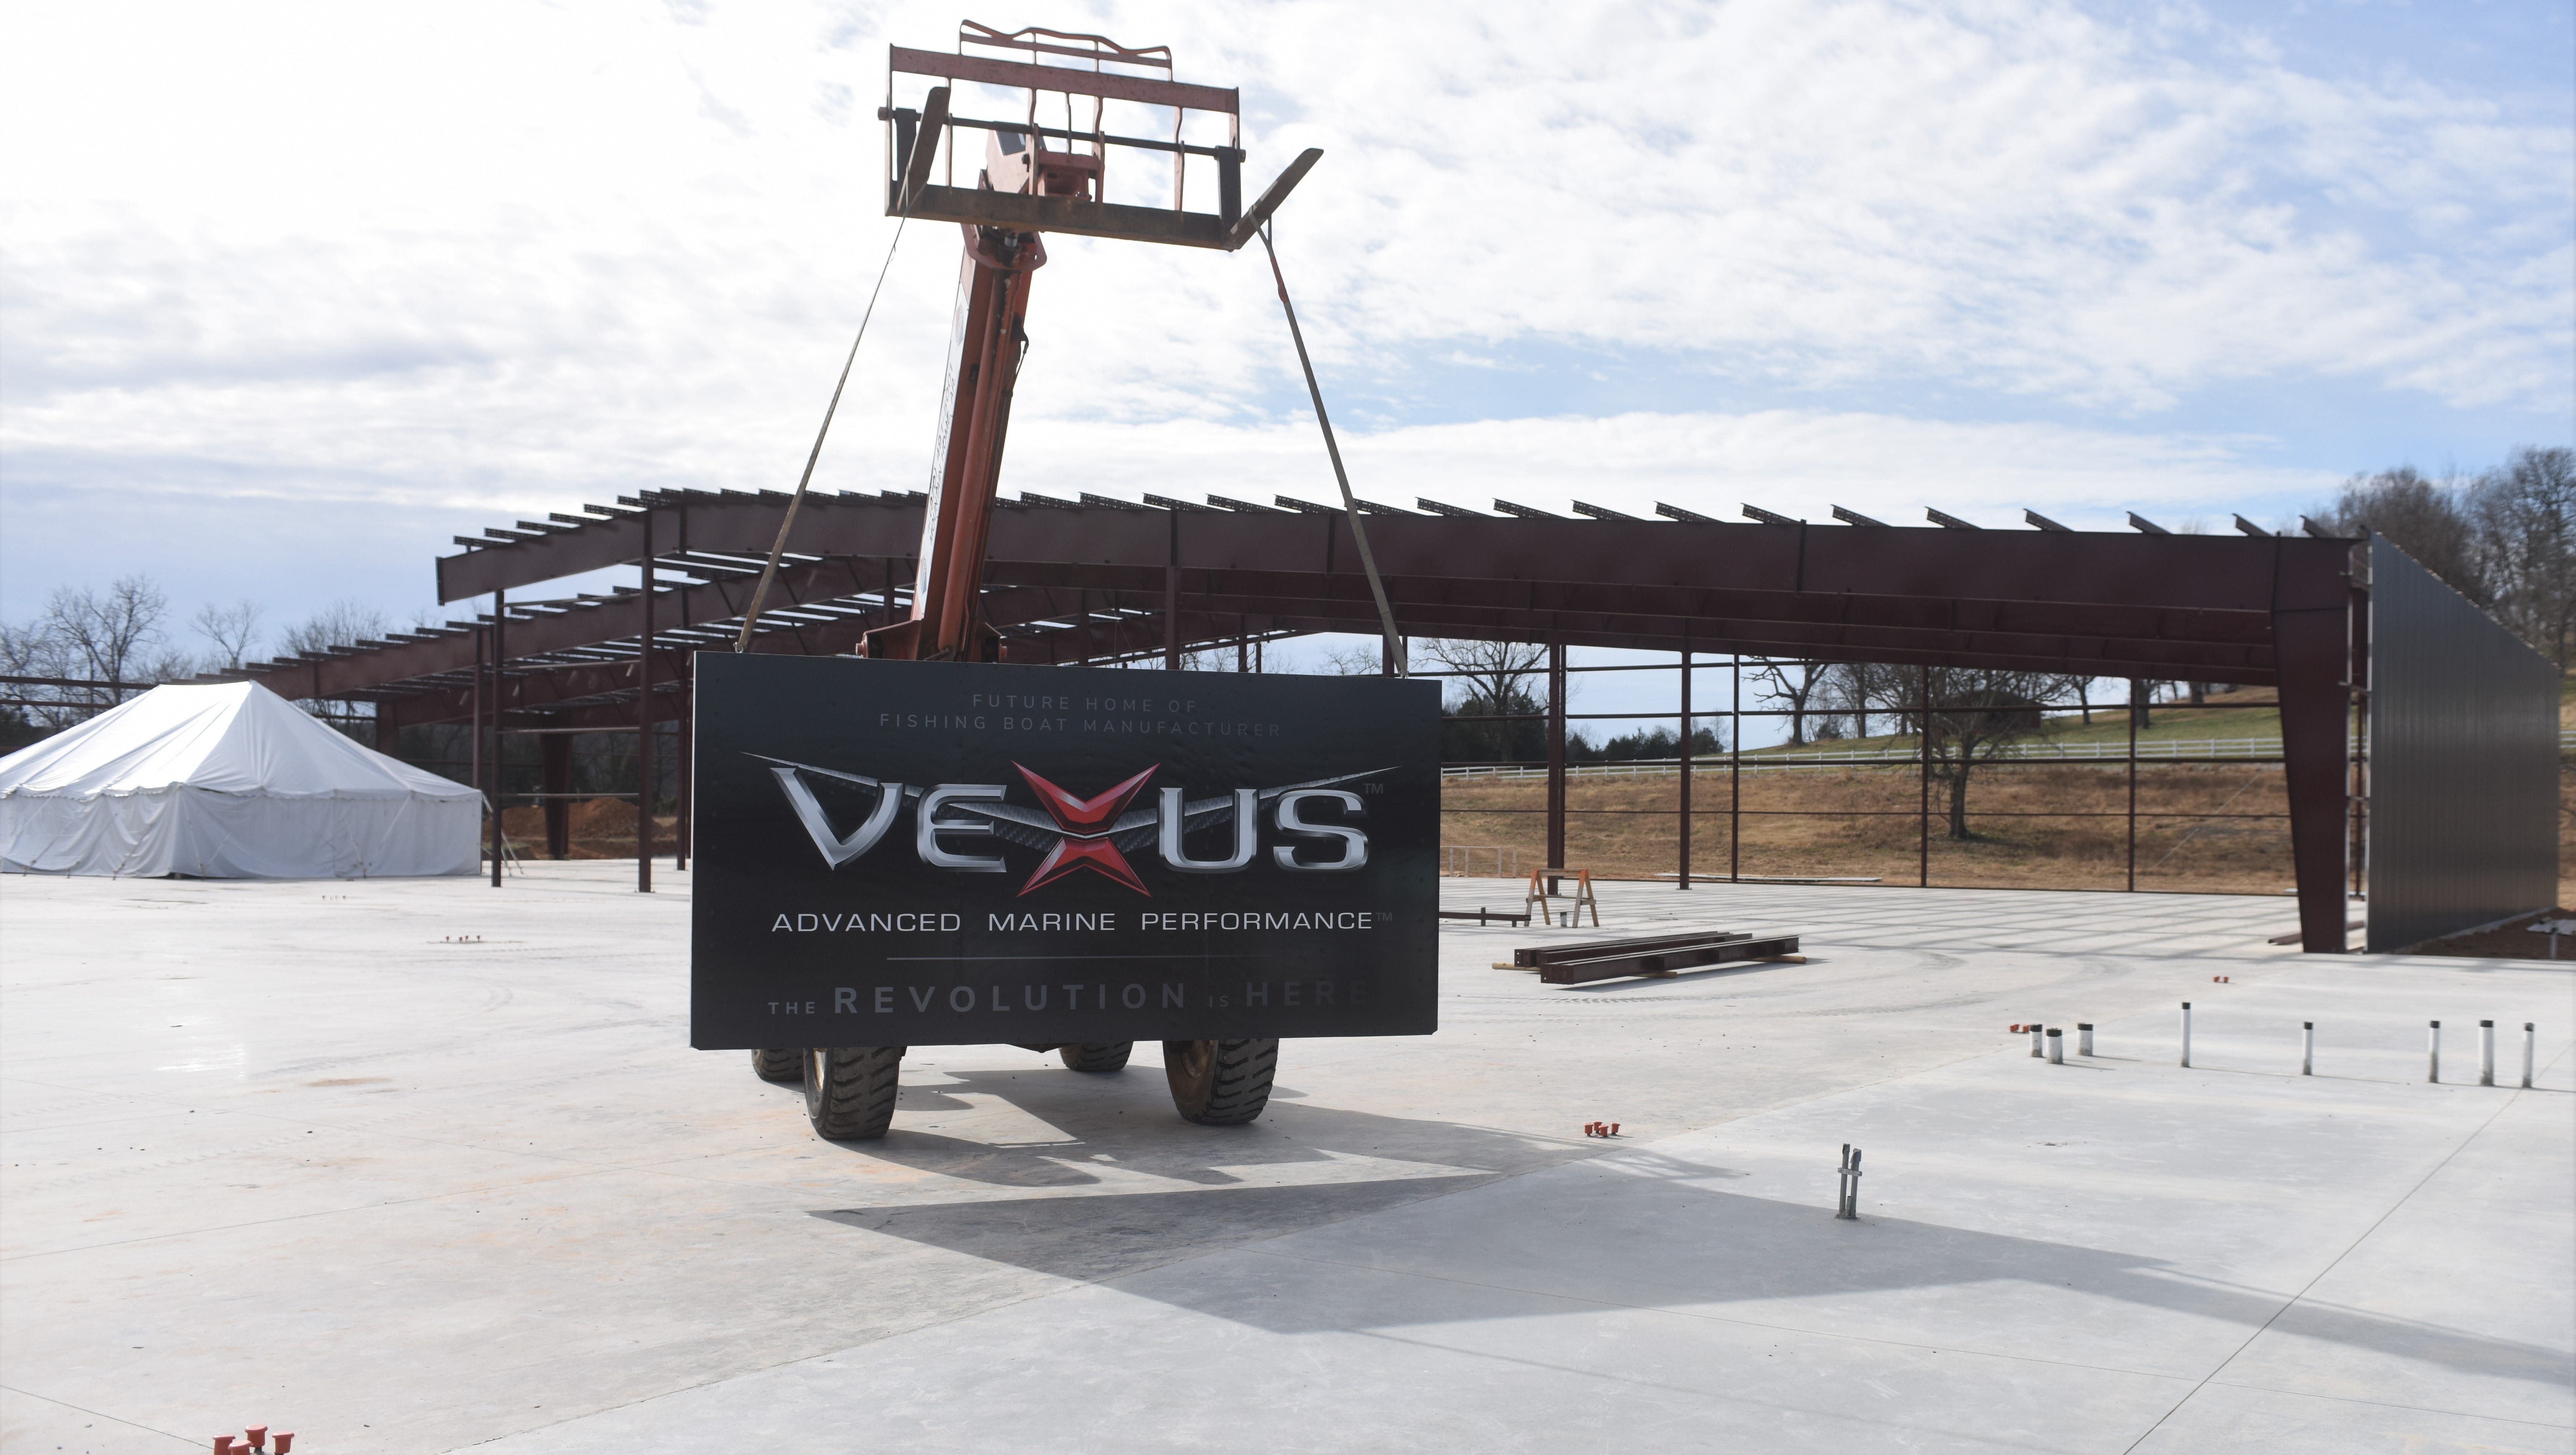 A sky lift bearing the Vexus Boats logo is parked in front of the boat manufacturer